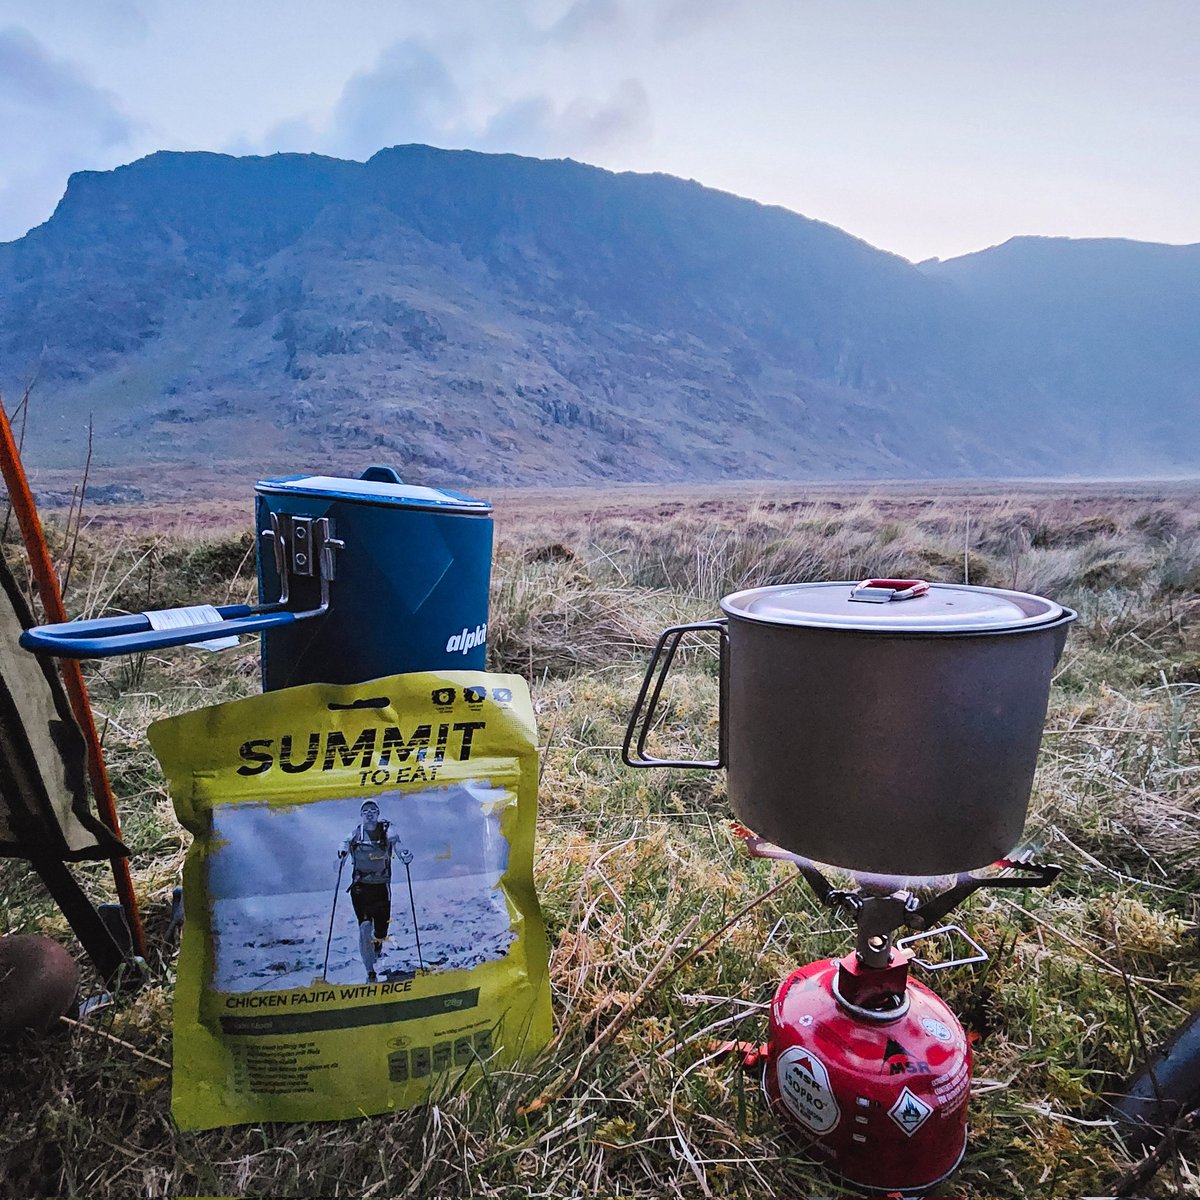 Wildcampers, what's your go-to meal choice?

I've found my new favourite @SummitToEat meal, chicken fajita with rice, paired with the MSR pocket rocket for a rapid boil.

#eryri #snowdonia #wales #cymru #northwales  #mountains #snowdon #northwalestagram #wildcampinguk